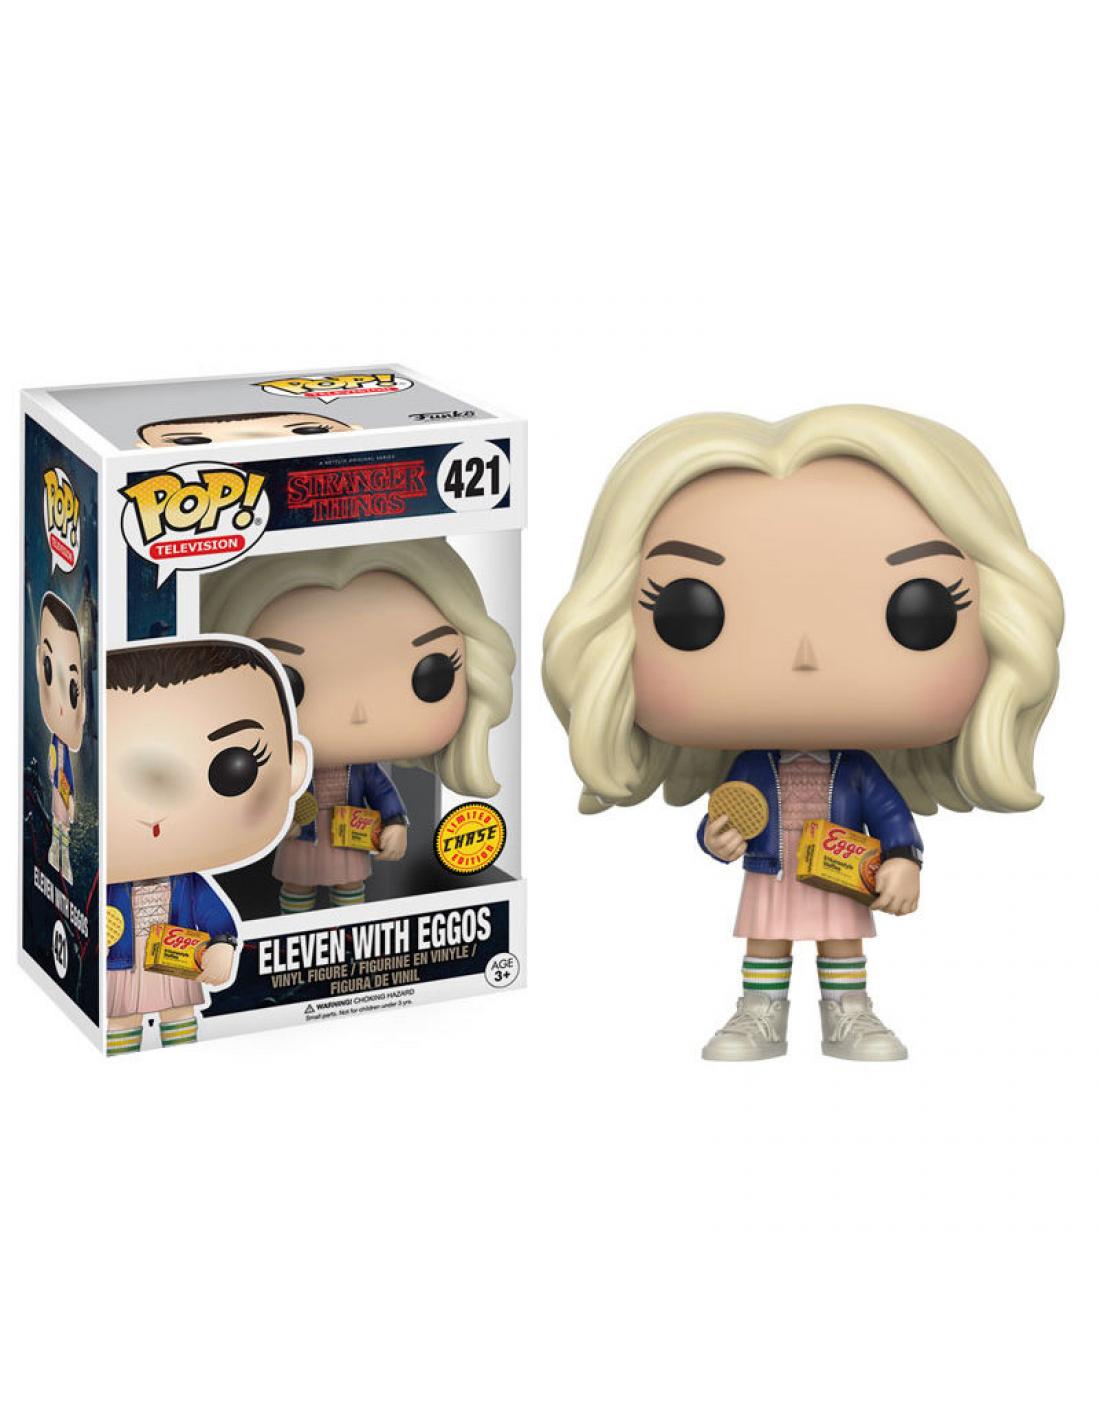 FIGURA POP STRANGER THINGS -ELEVEN CHASE EDITION WITH EGGOS 421-